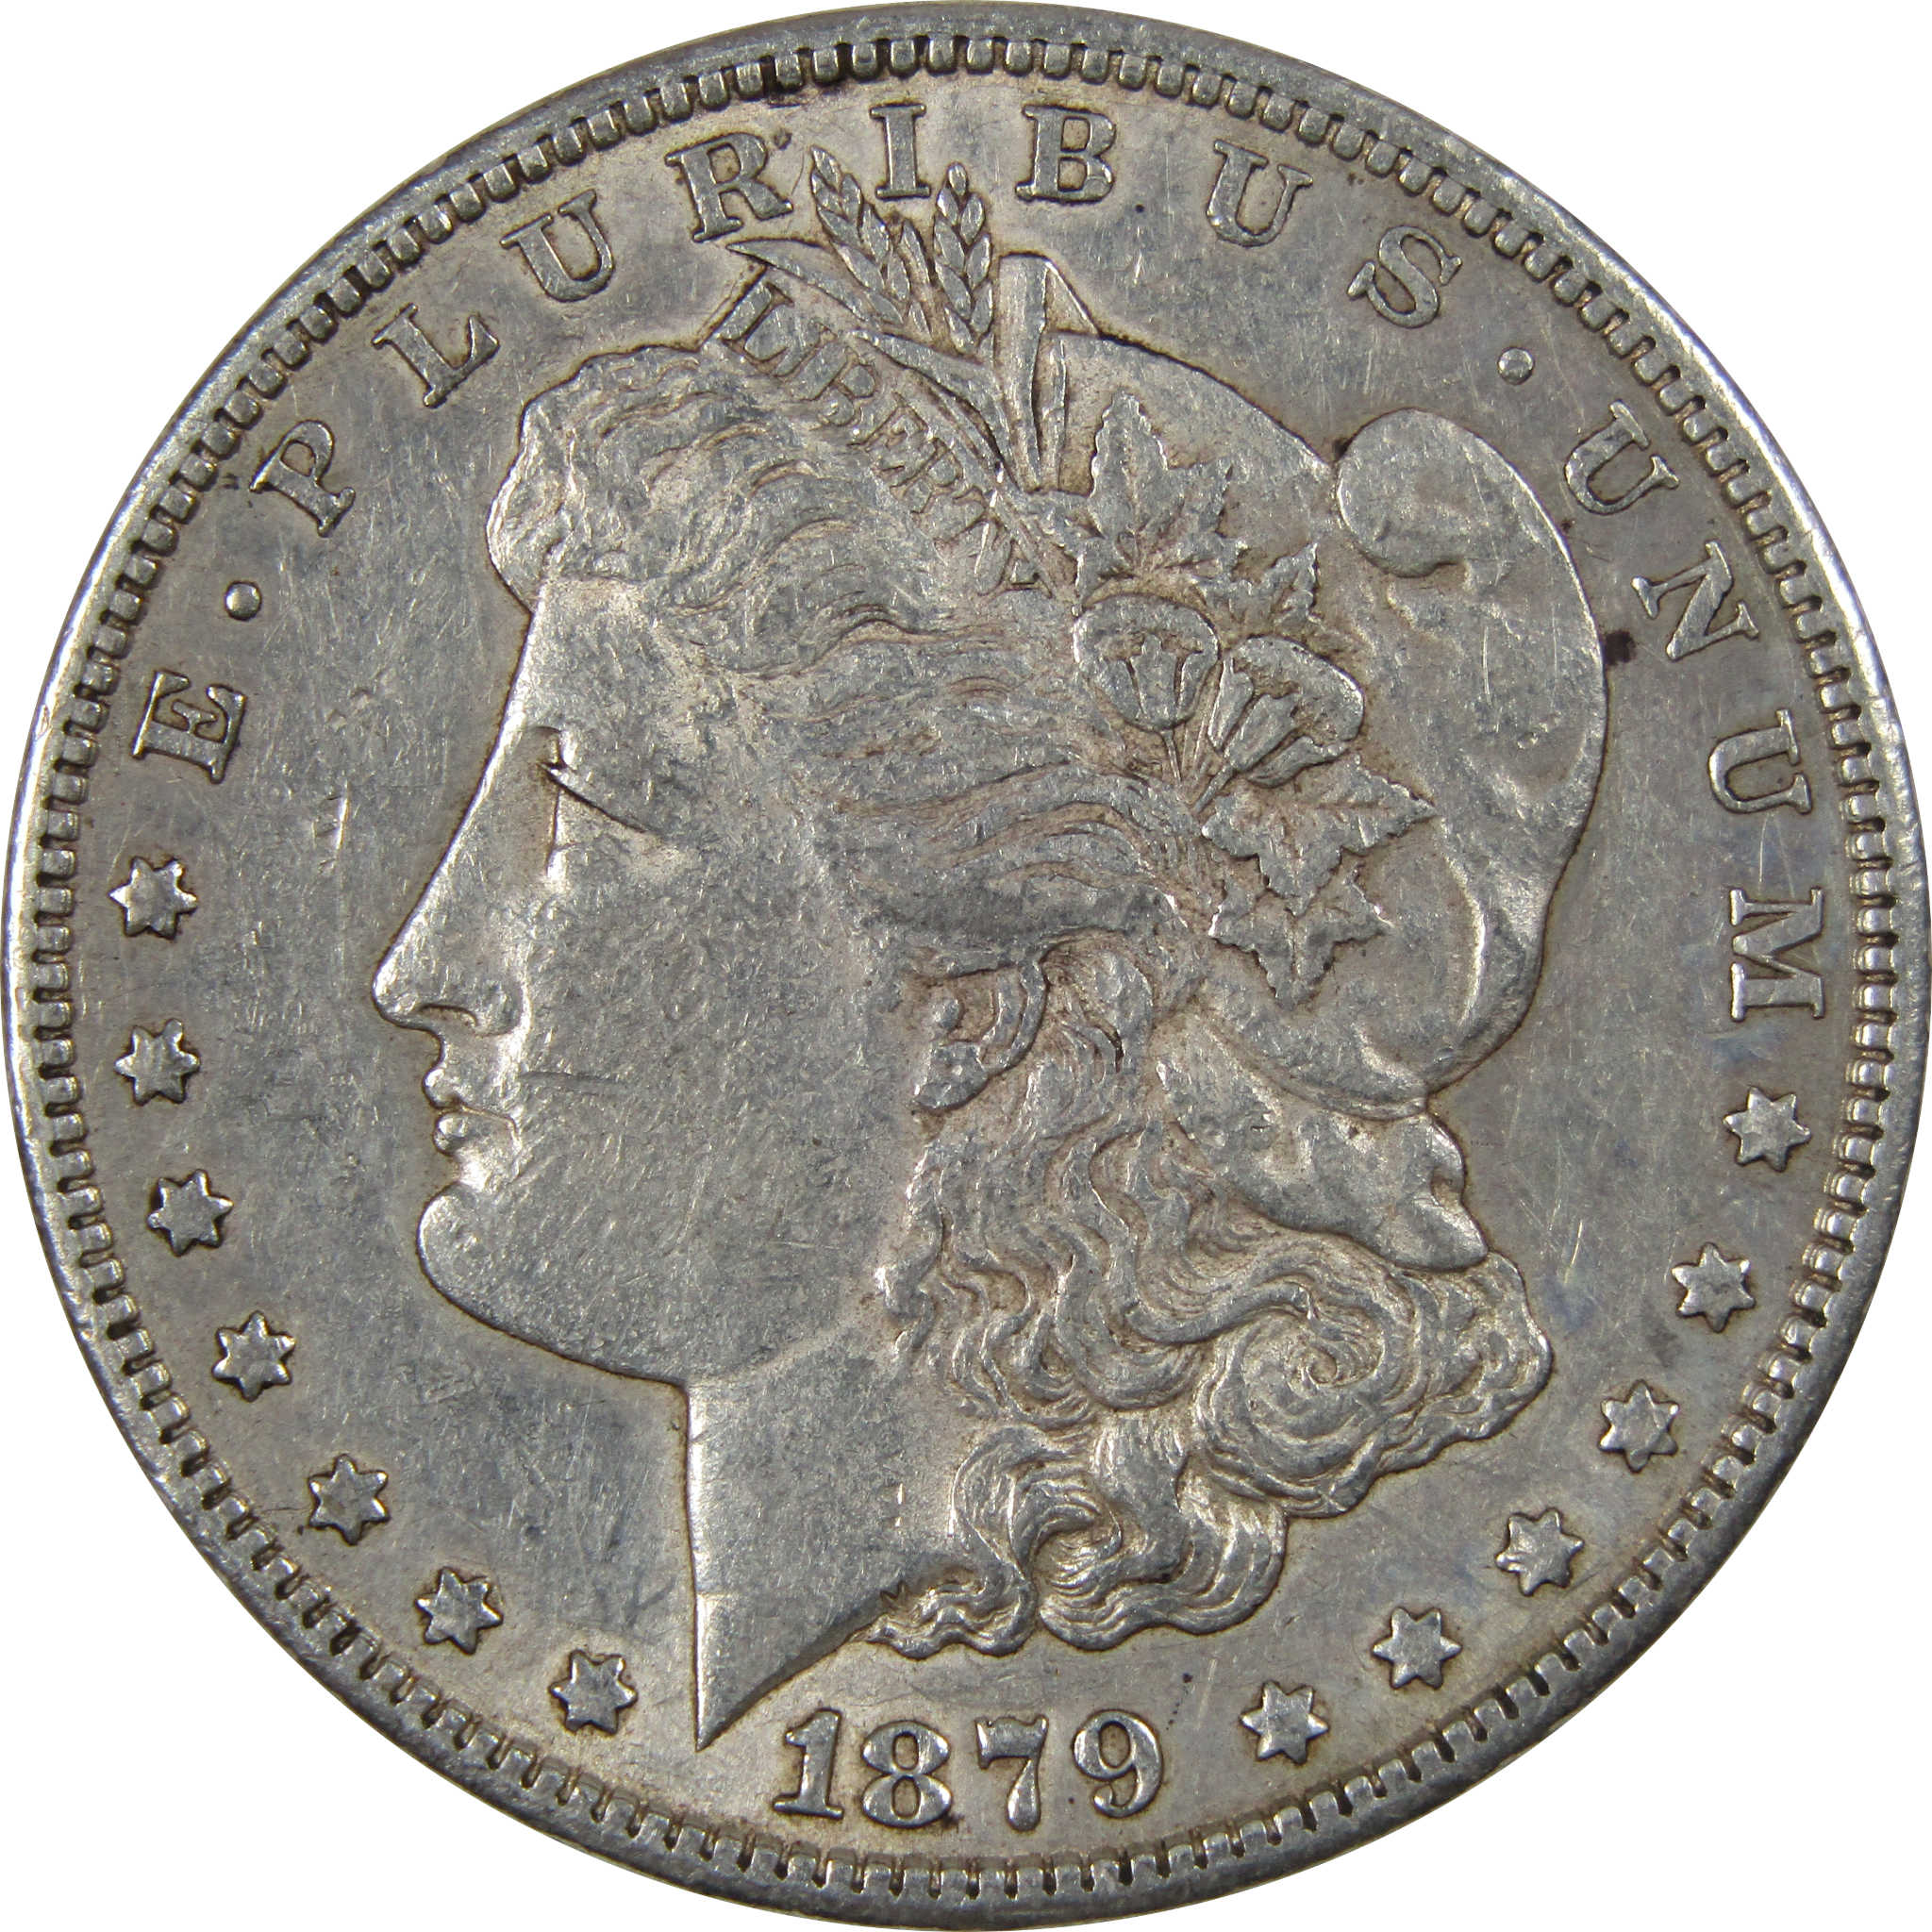 1879 S Rev 78 Morgan Dollar Extremely Fine 90% Silver Coin SKU:I772 - Morgan coin - Morgan silver dollar - Morgan silver dollar for sale - Profile Coins &amp; Collectibles